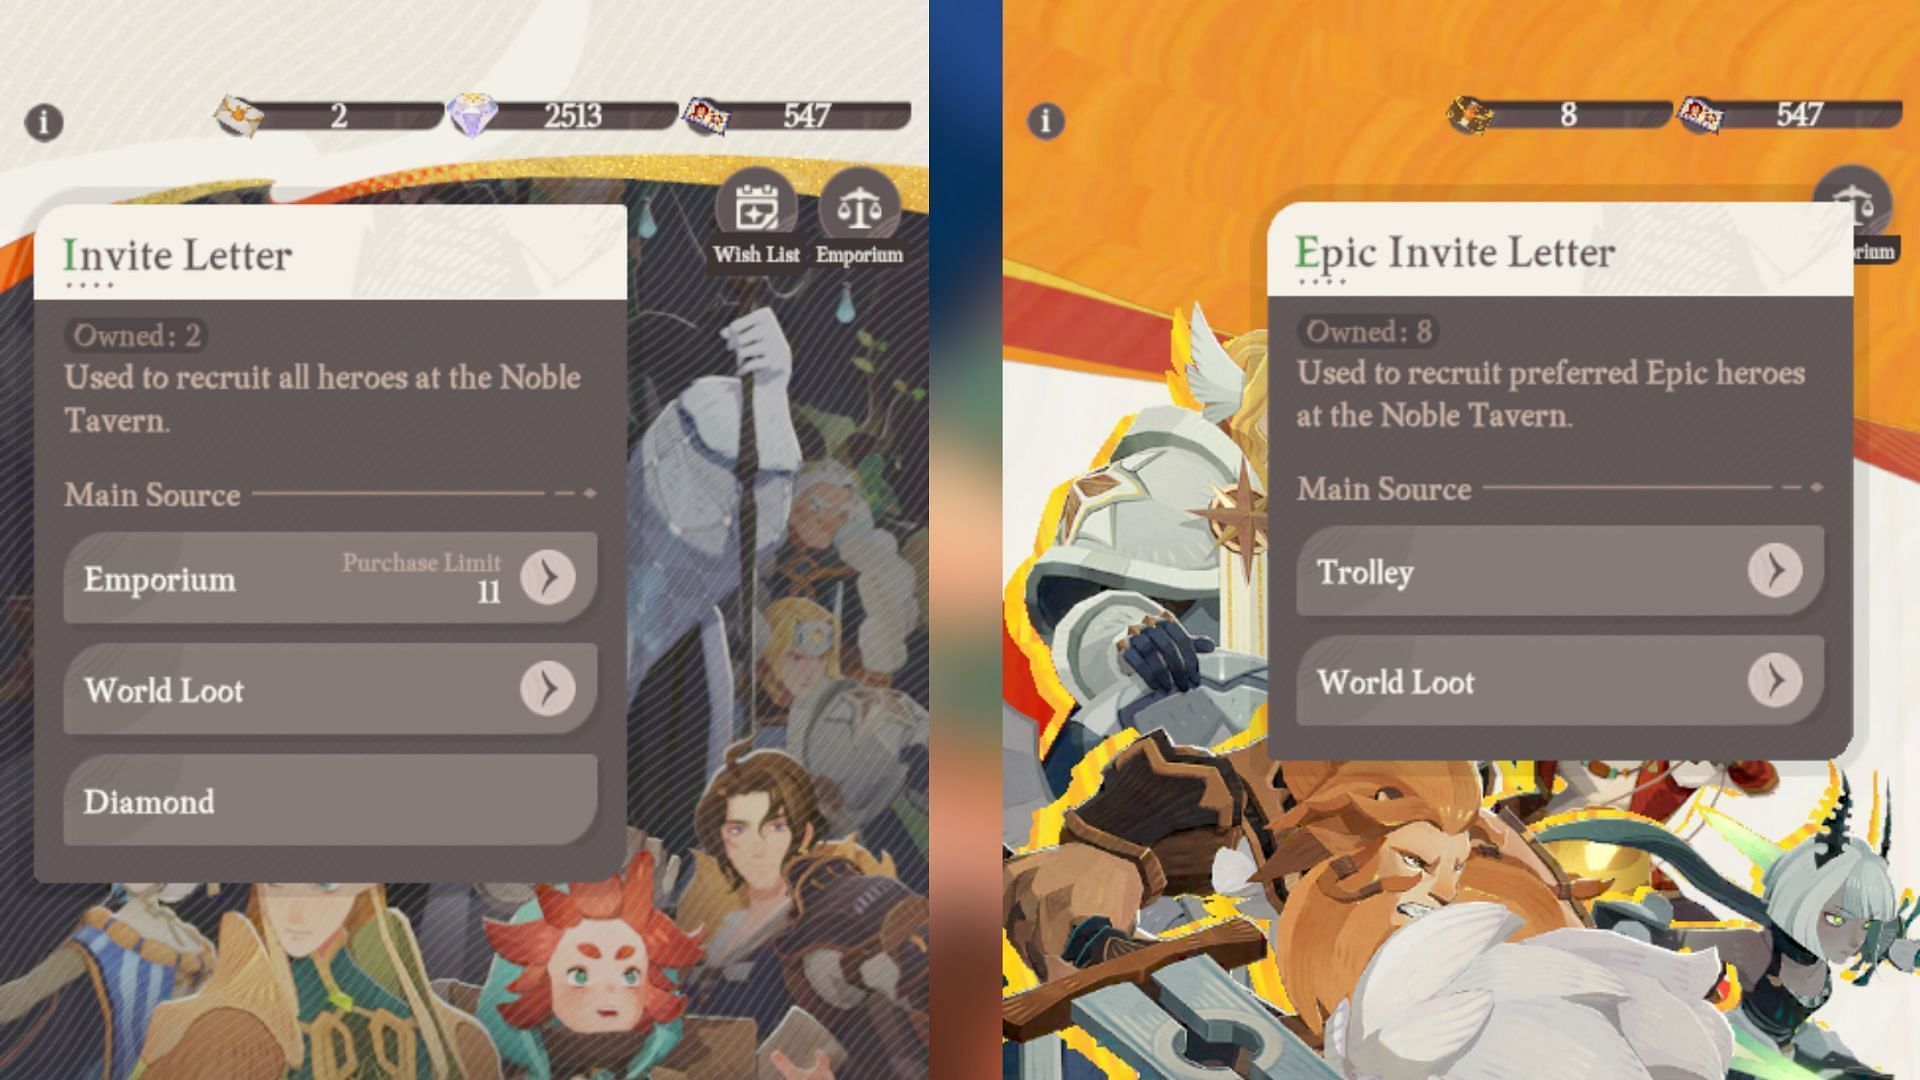 Farm Epic and All-Hero Invite Letters in various ways. (Image via Farlight)